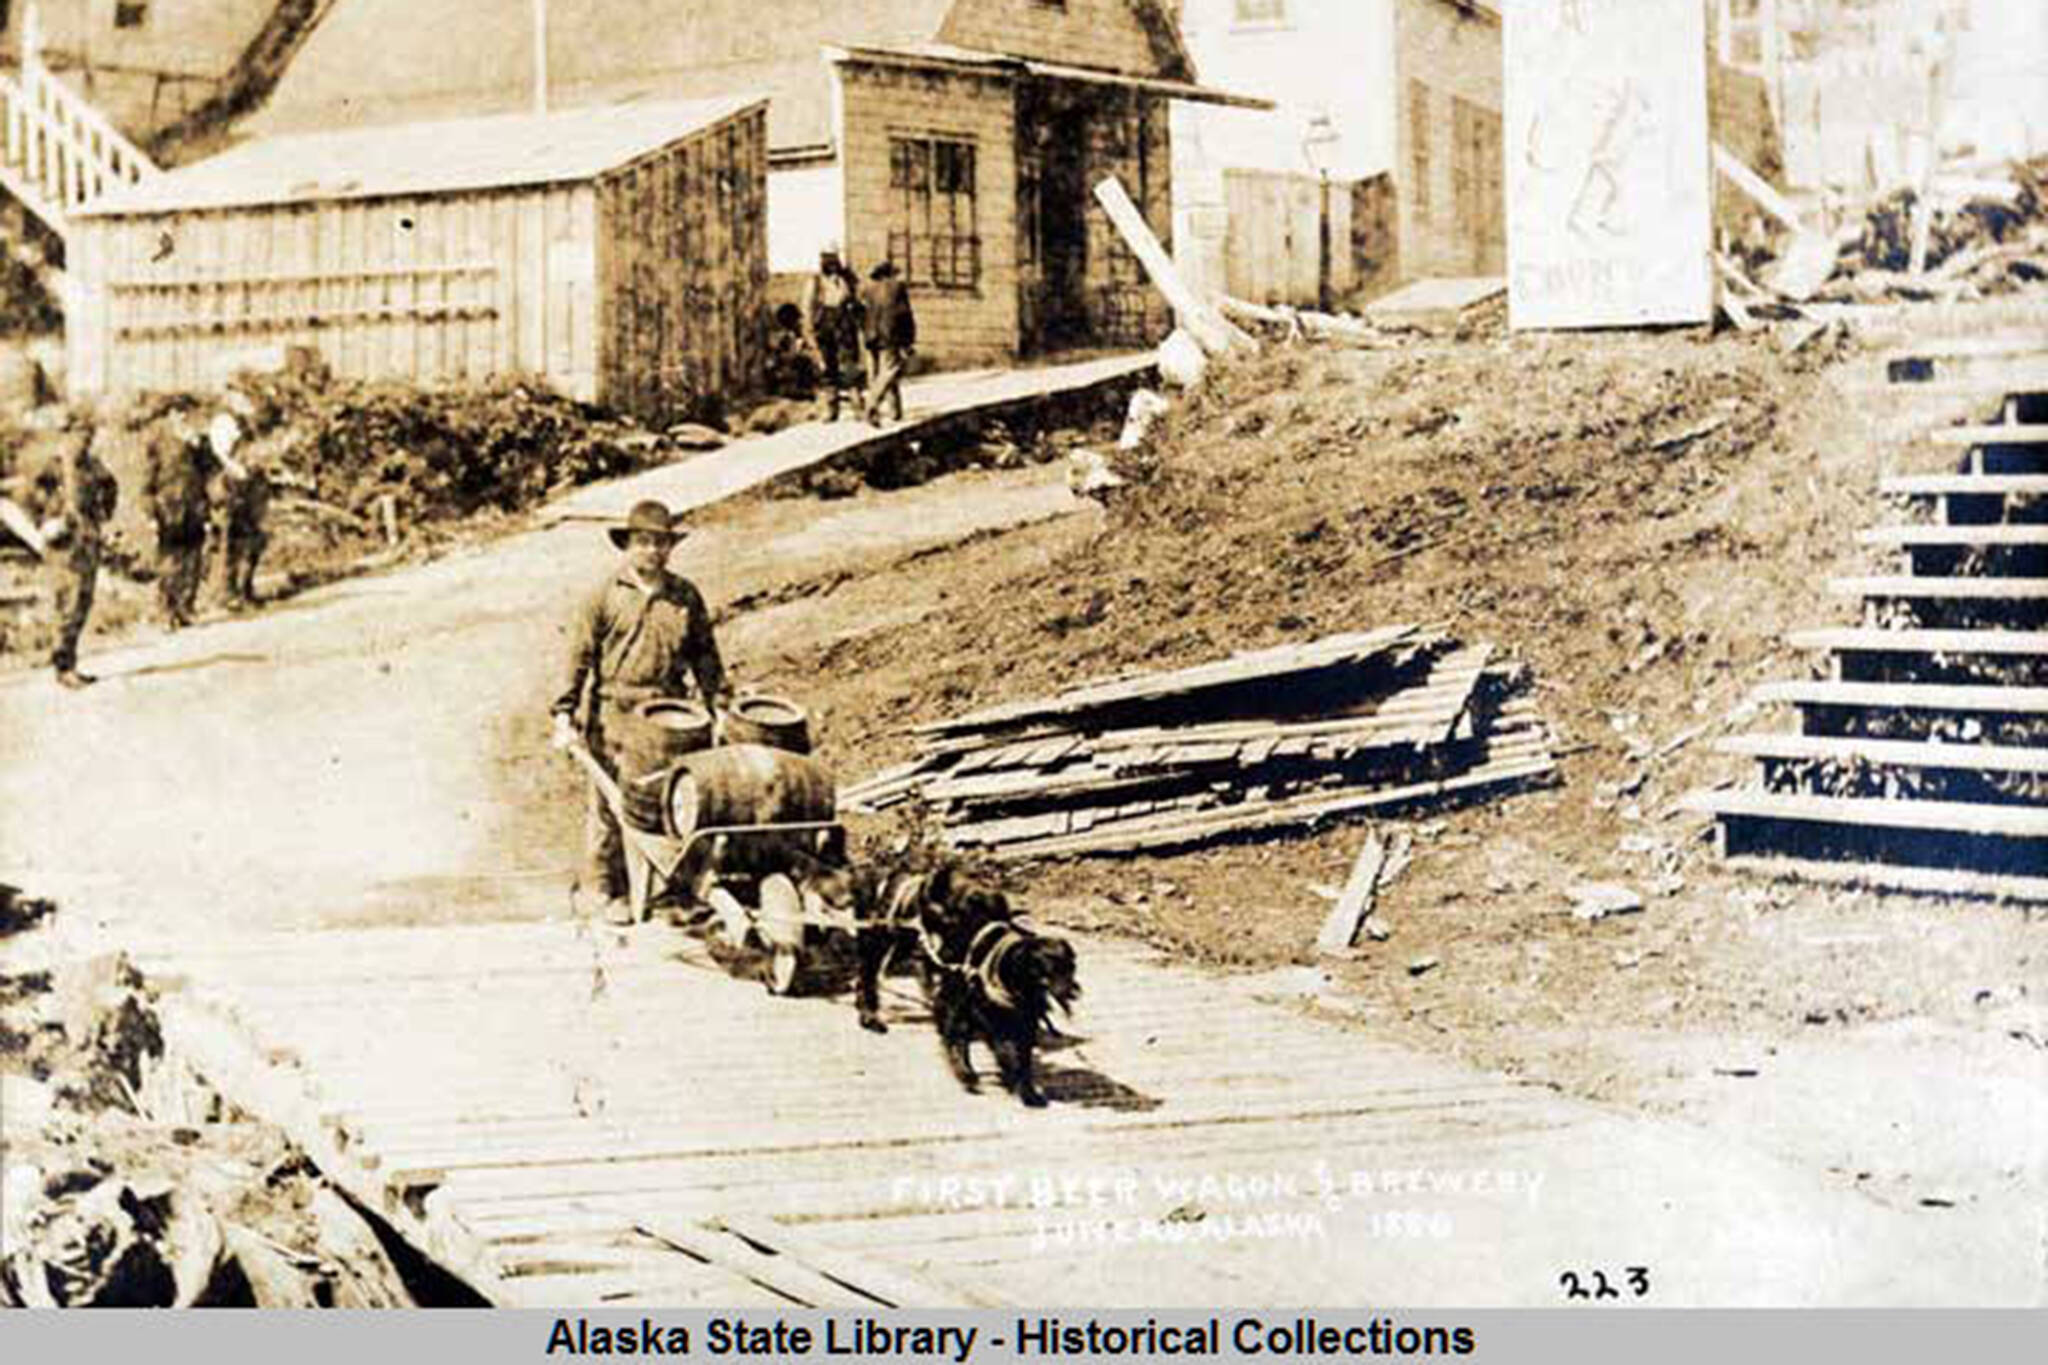 This photo from the Capt. George H. Whitney Photograph Collection shows a man, with wheelbarrow cart and two dogs in harness, transports beer barrels along boardwalk; pedestrians, buildings, and sign for Coon's Drugstore in background in Juneau in 1886. Juneau and Douglas' breweries were the subject of the Gastineau Channel Historical Society's award-winning newsletter. (William Howard Case/ Alaska State Library - Historical Collections)